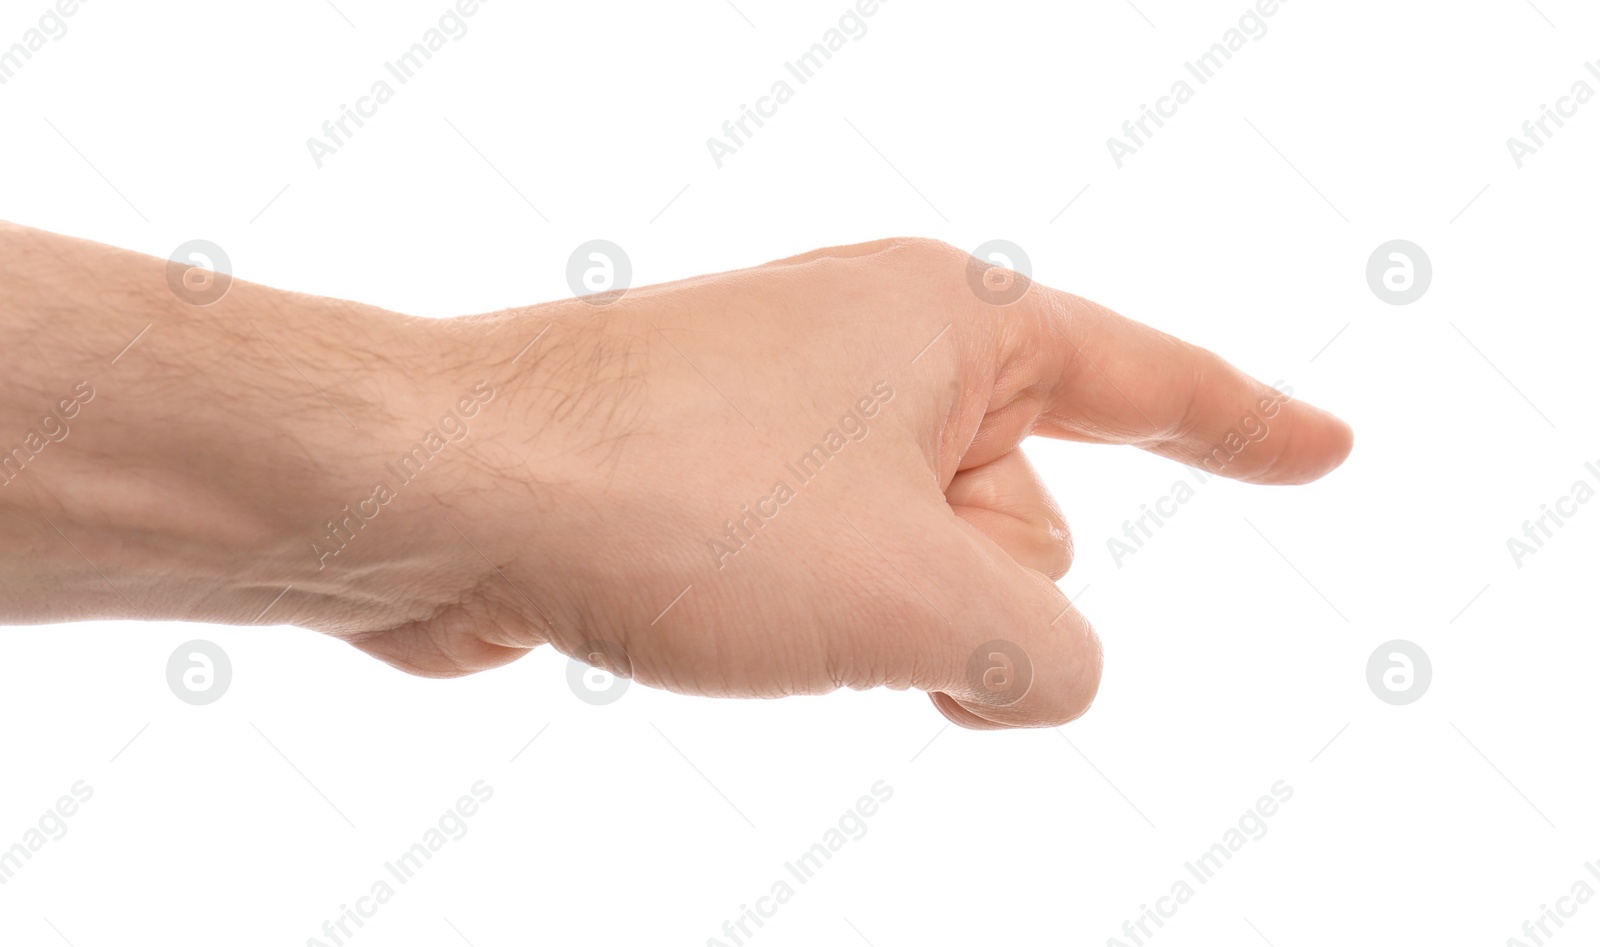 Photo of Man pointing with index finger on white background, closeup